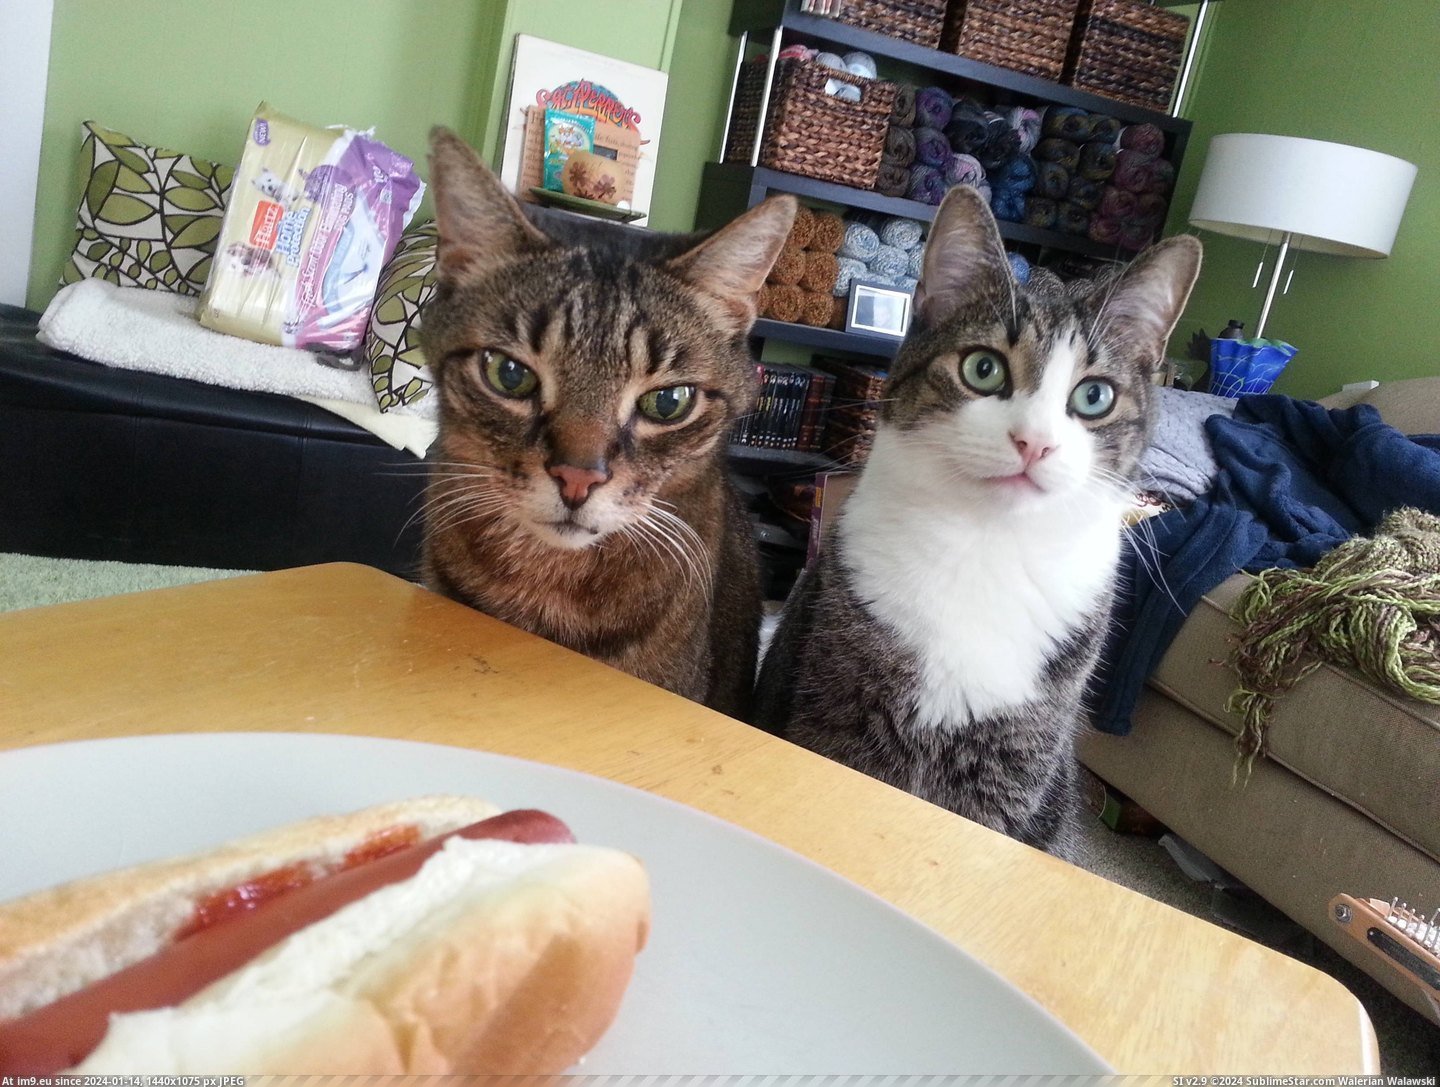 #Hot #Dogs #Cats [Cats] 'You're having hot dogs? We like hot dogs!' Pic. (Image of album My r/CATS favs))